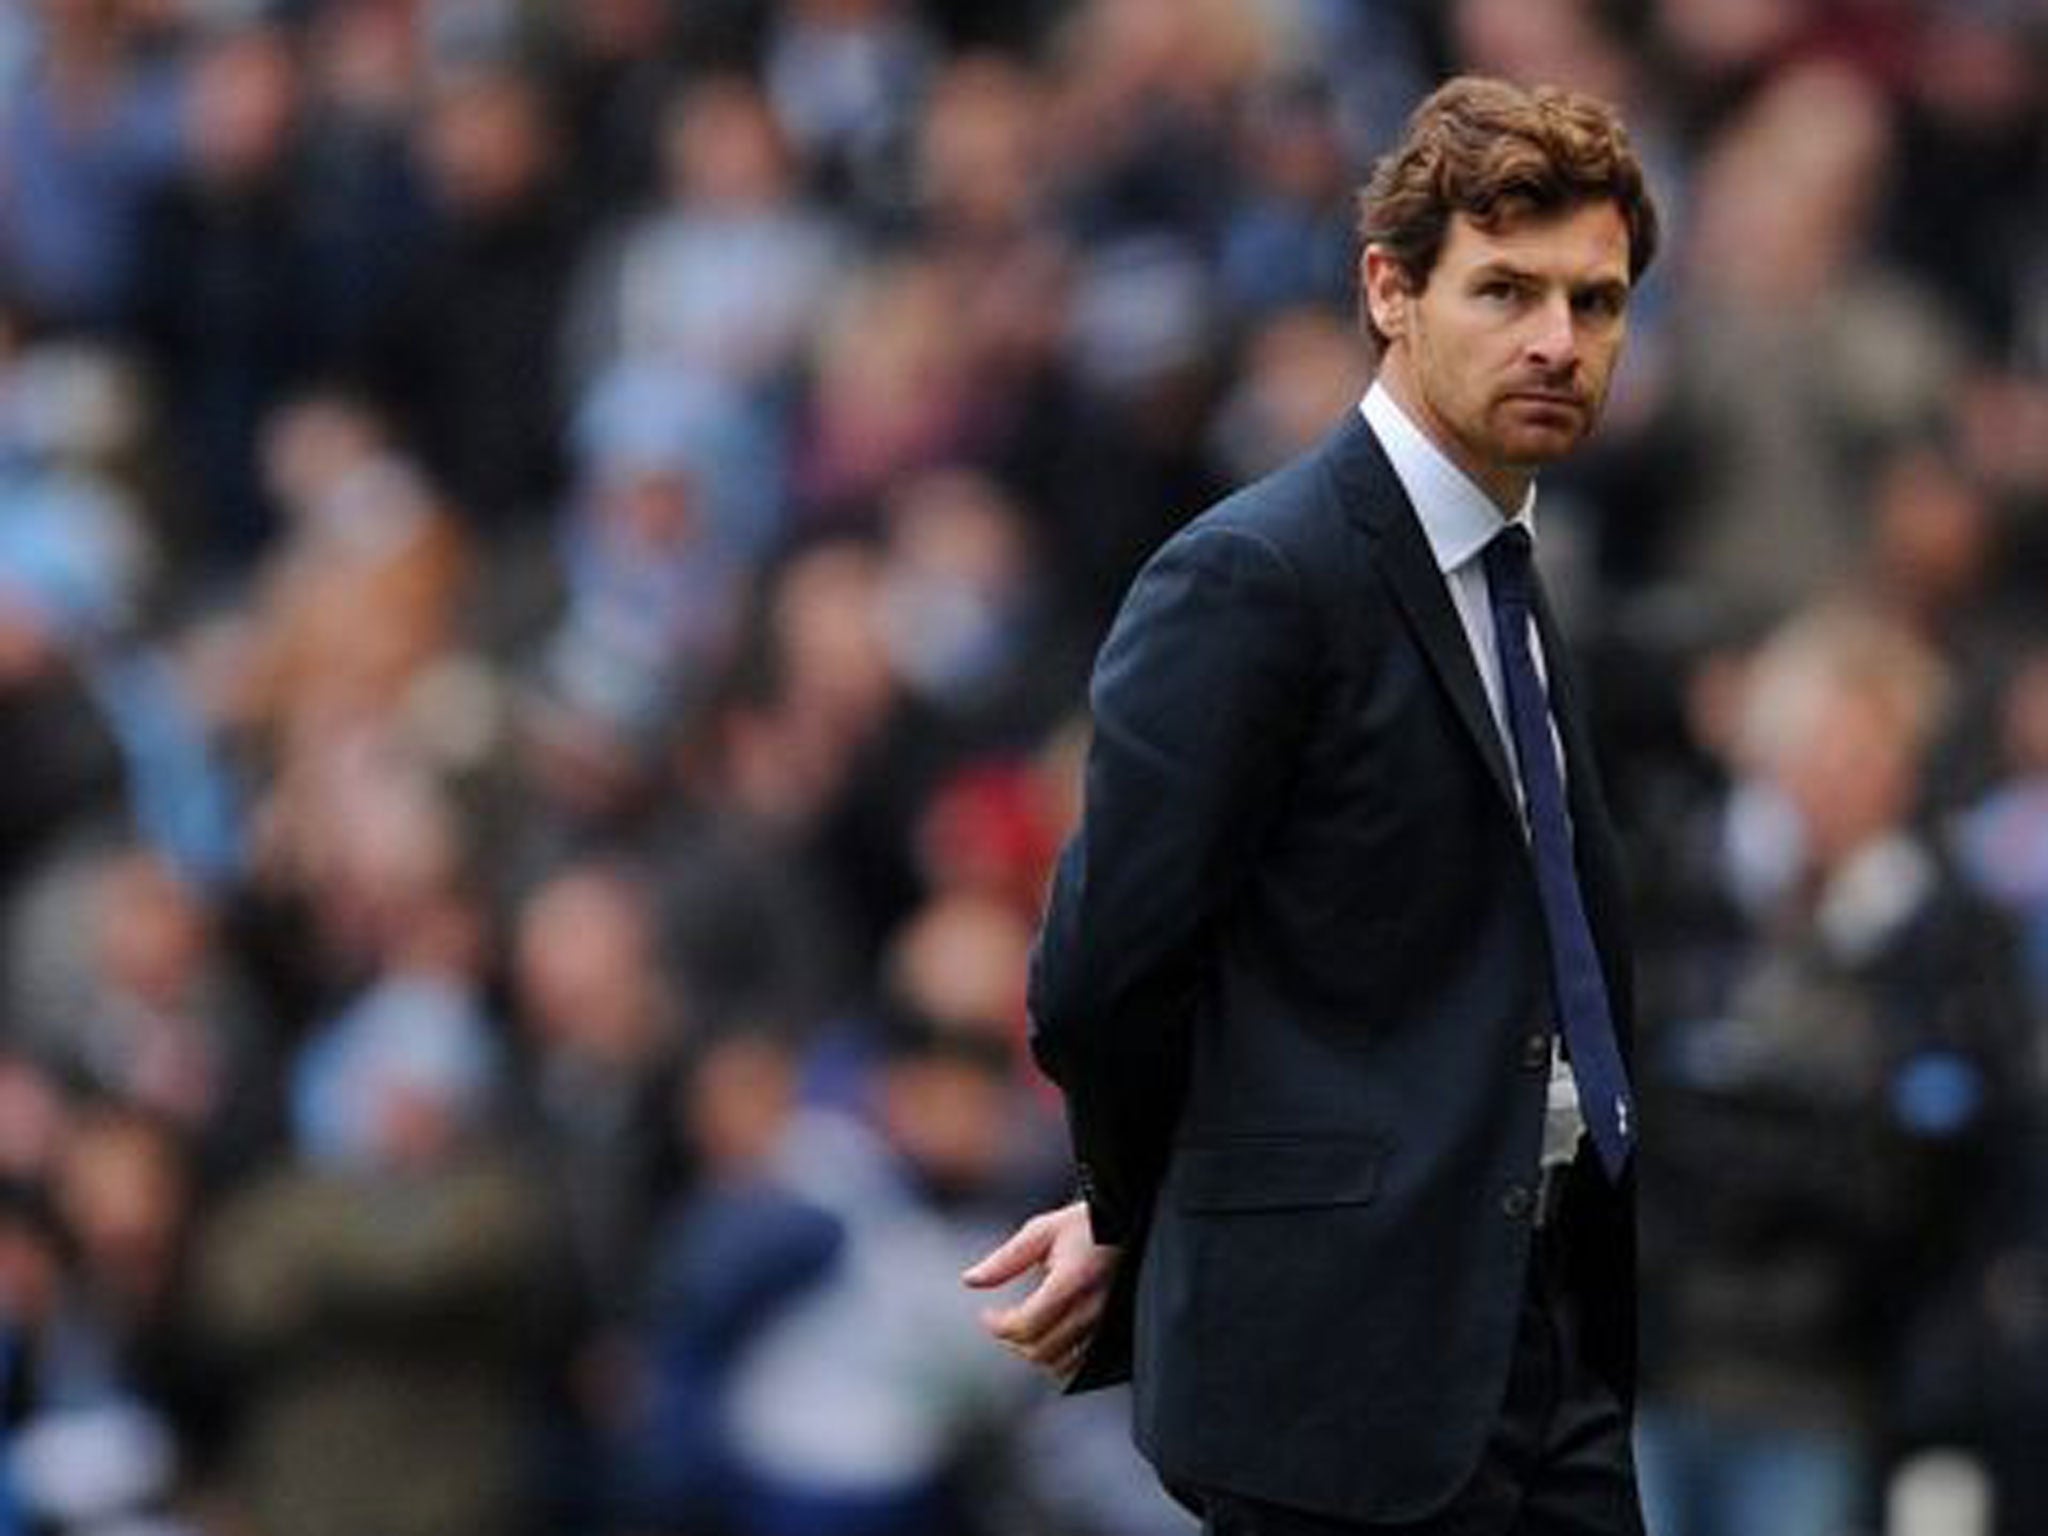 Tottenham are undergoing an existential crisis in the wake of the dismissal of Andre Villas-Boas